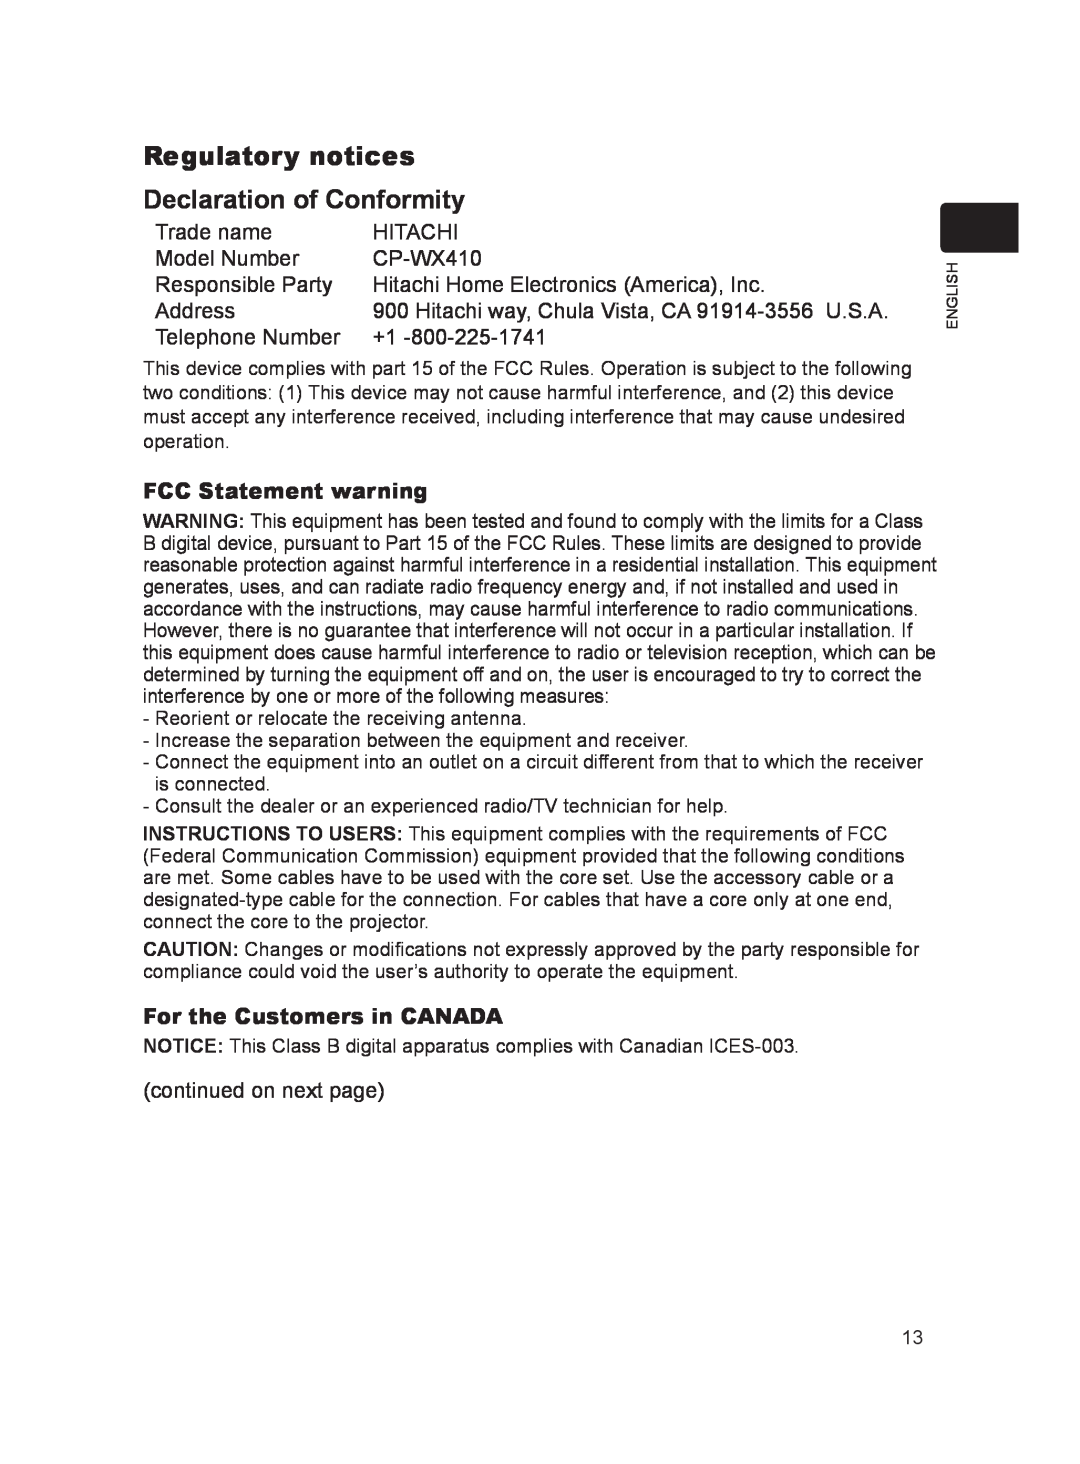 Dukane 8917H user manual Regulatory notices Declaration of Conformity, FCC Statement warning, For the Customers in CANADA 